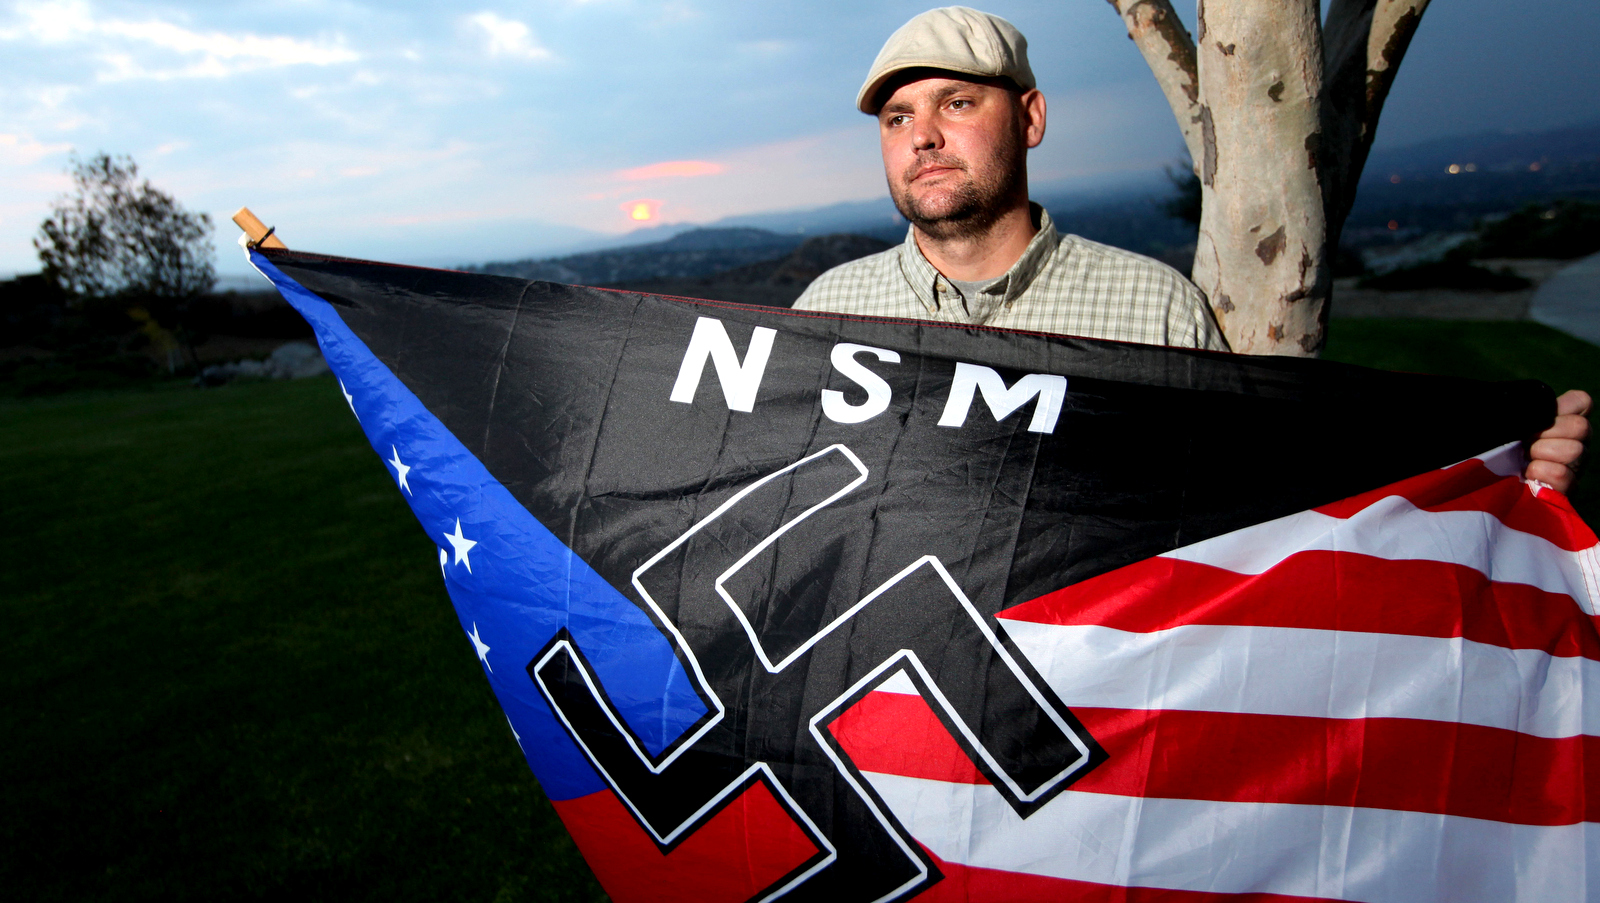 FILE - In this Oct. 22, 2010 file photo, Jeff Hall holds a Neo Nazi flag while standing at Sycamore Highlands Park near his home in Riverside, Calif. On Tuesday, Oct. 30, 2012. (AP Photo/Sandy Huffaker)